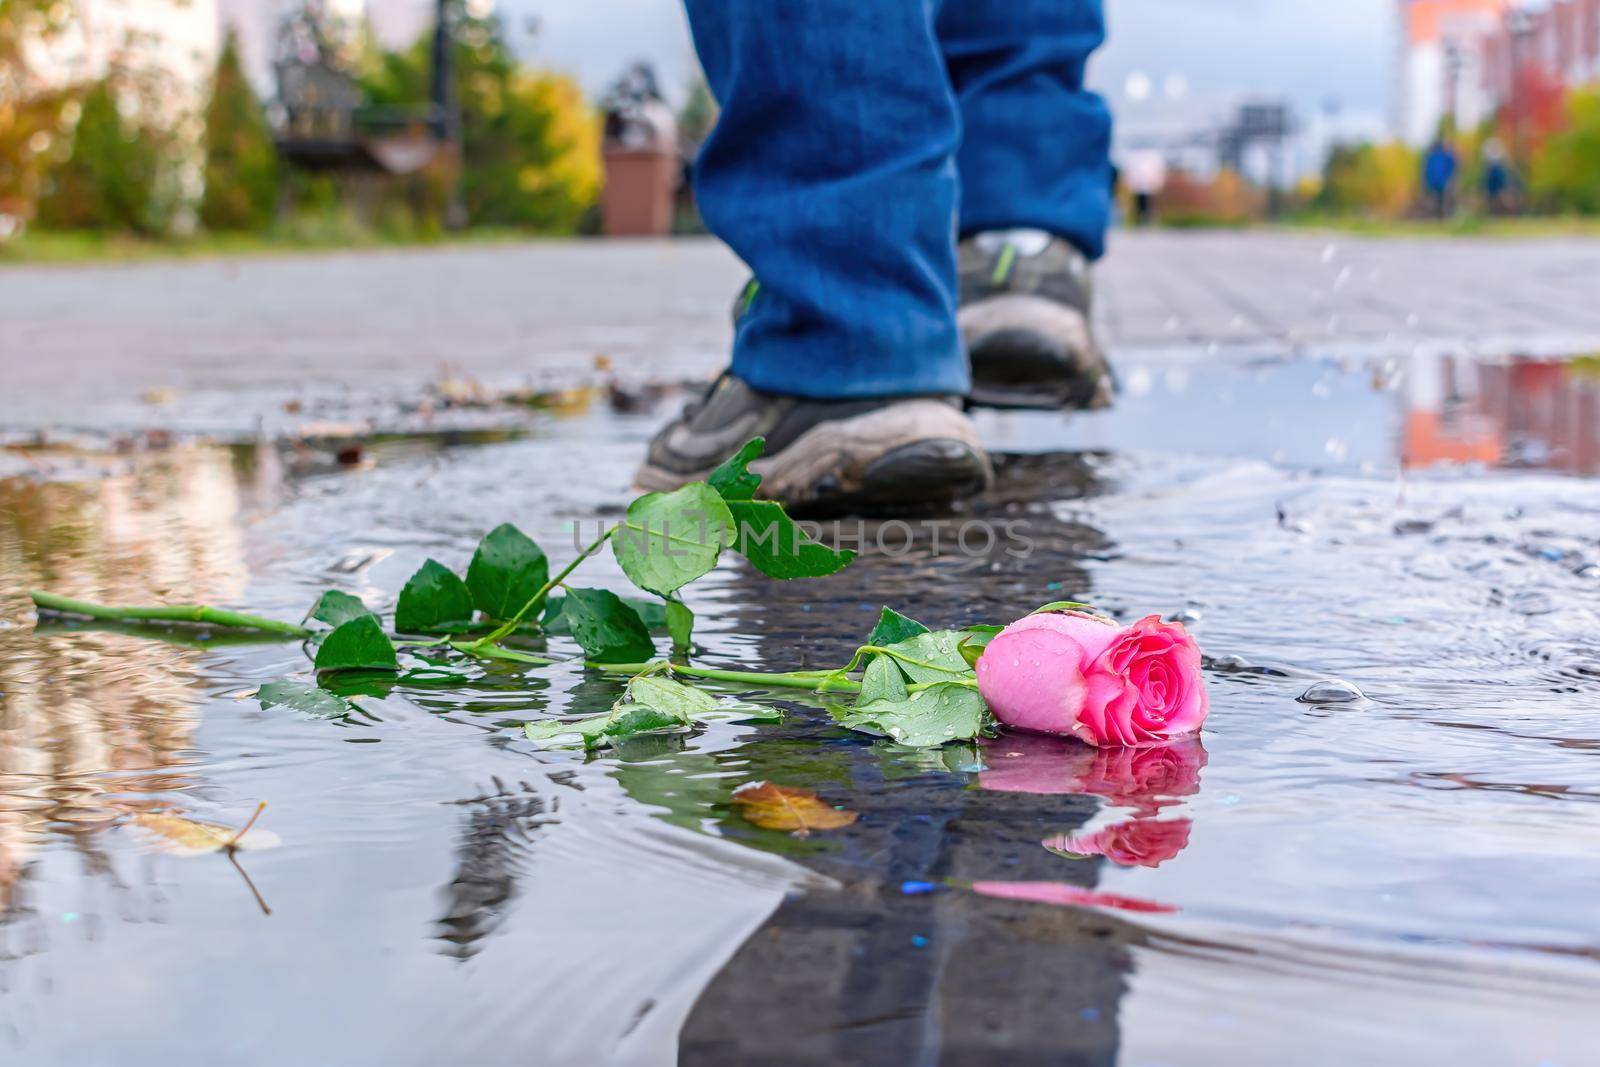 A rose lies in a puddle against the background of passers-by by Skaron